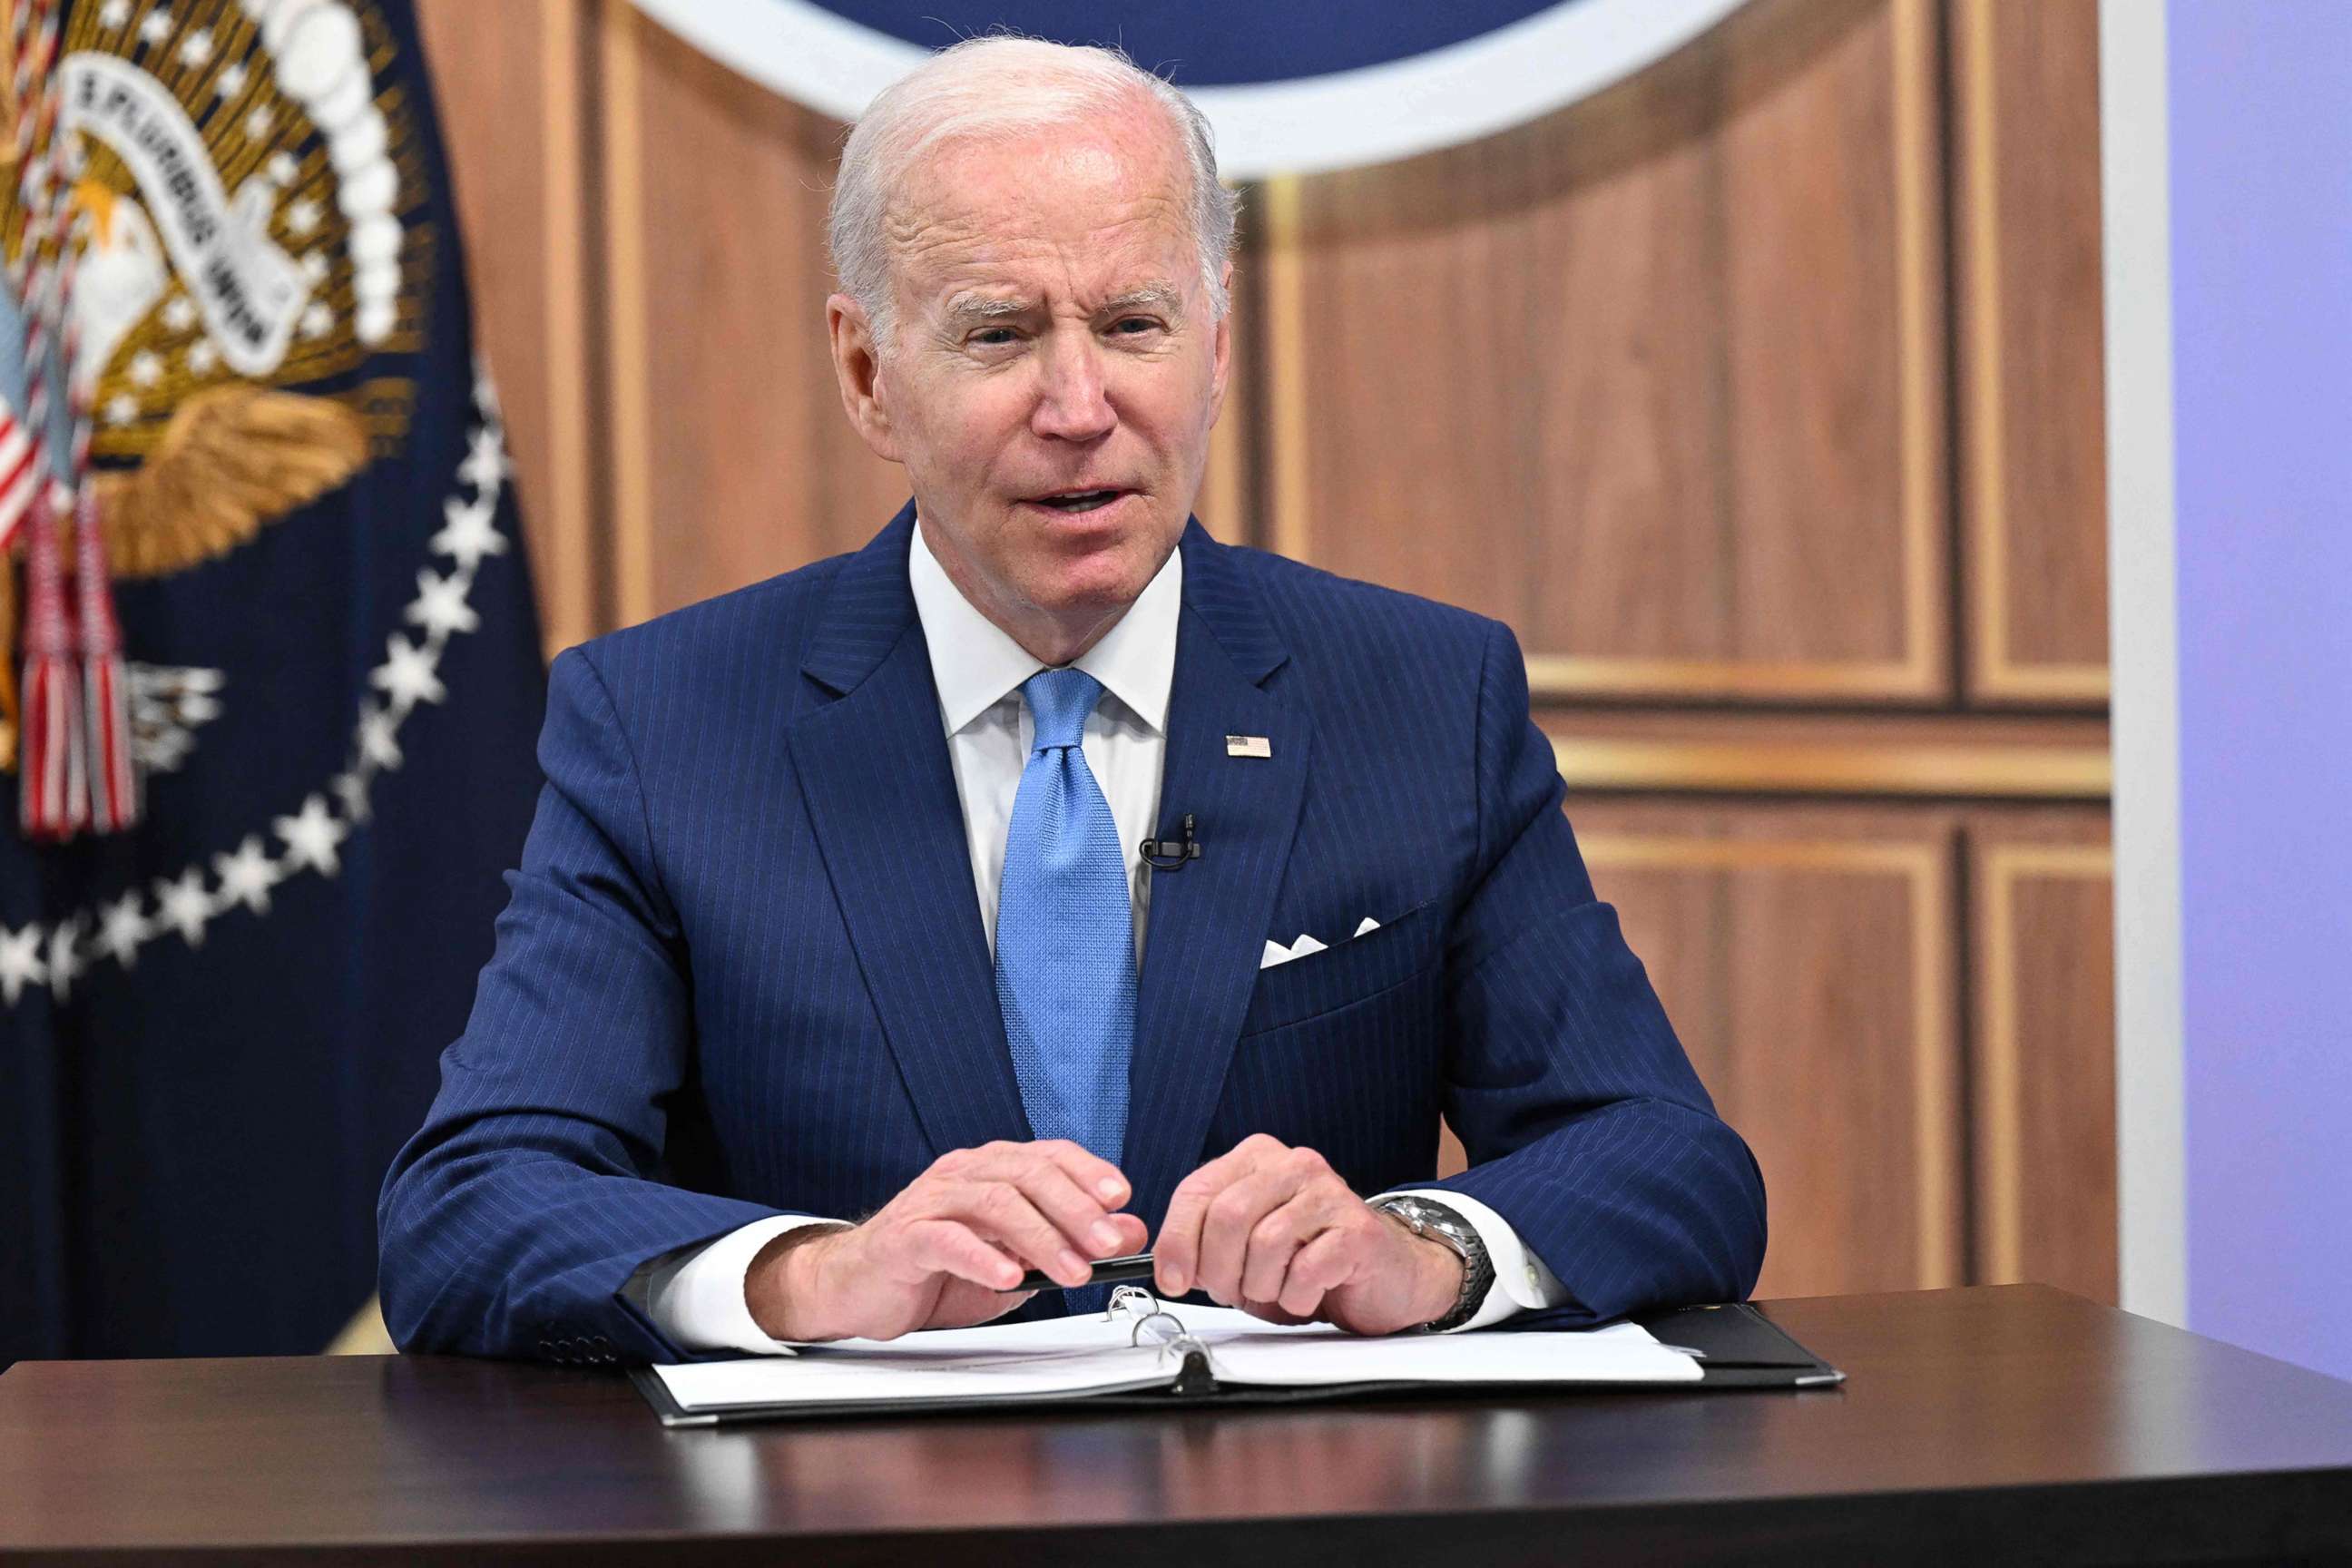 PHOTO: President Joe Biden speaks during a virtual meeting with administration officials and major infant formula manufacturers to urge an increase in infant formula production through Operation Fly Formula, in Washington, D.C., on June 1, 2022.